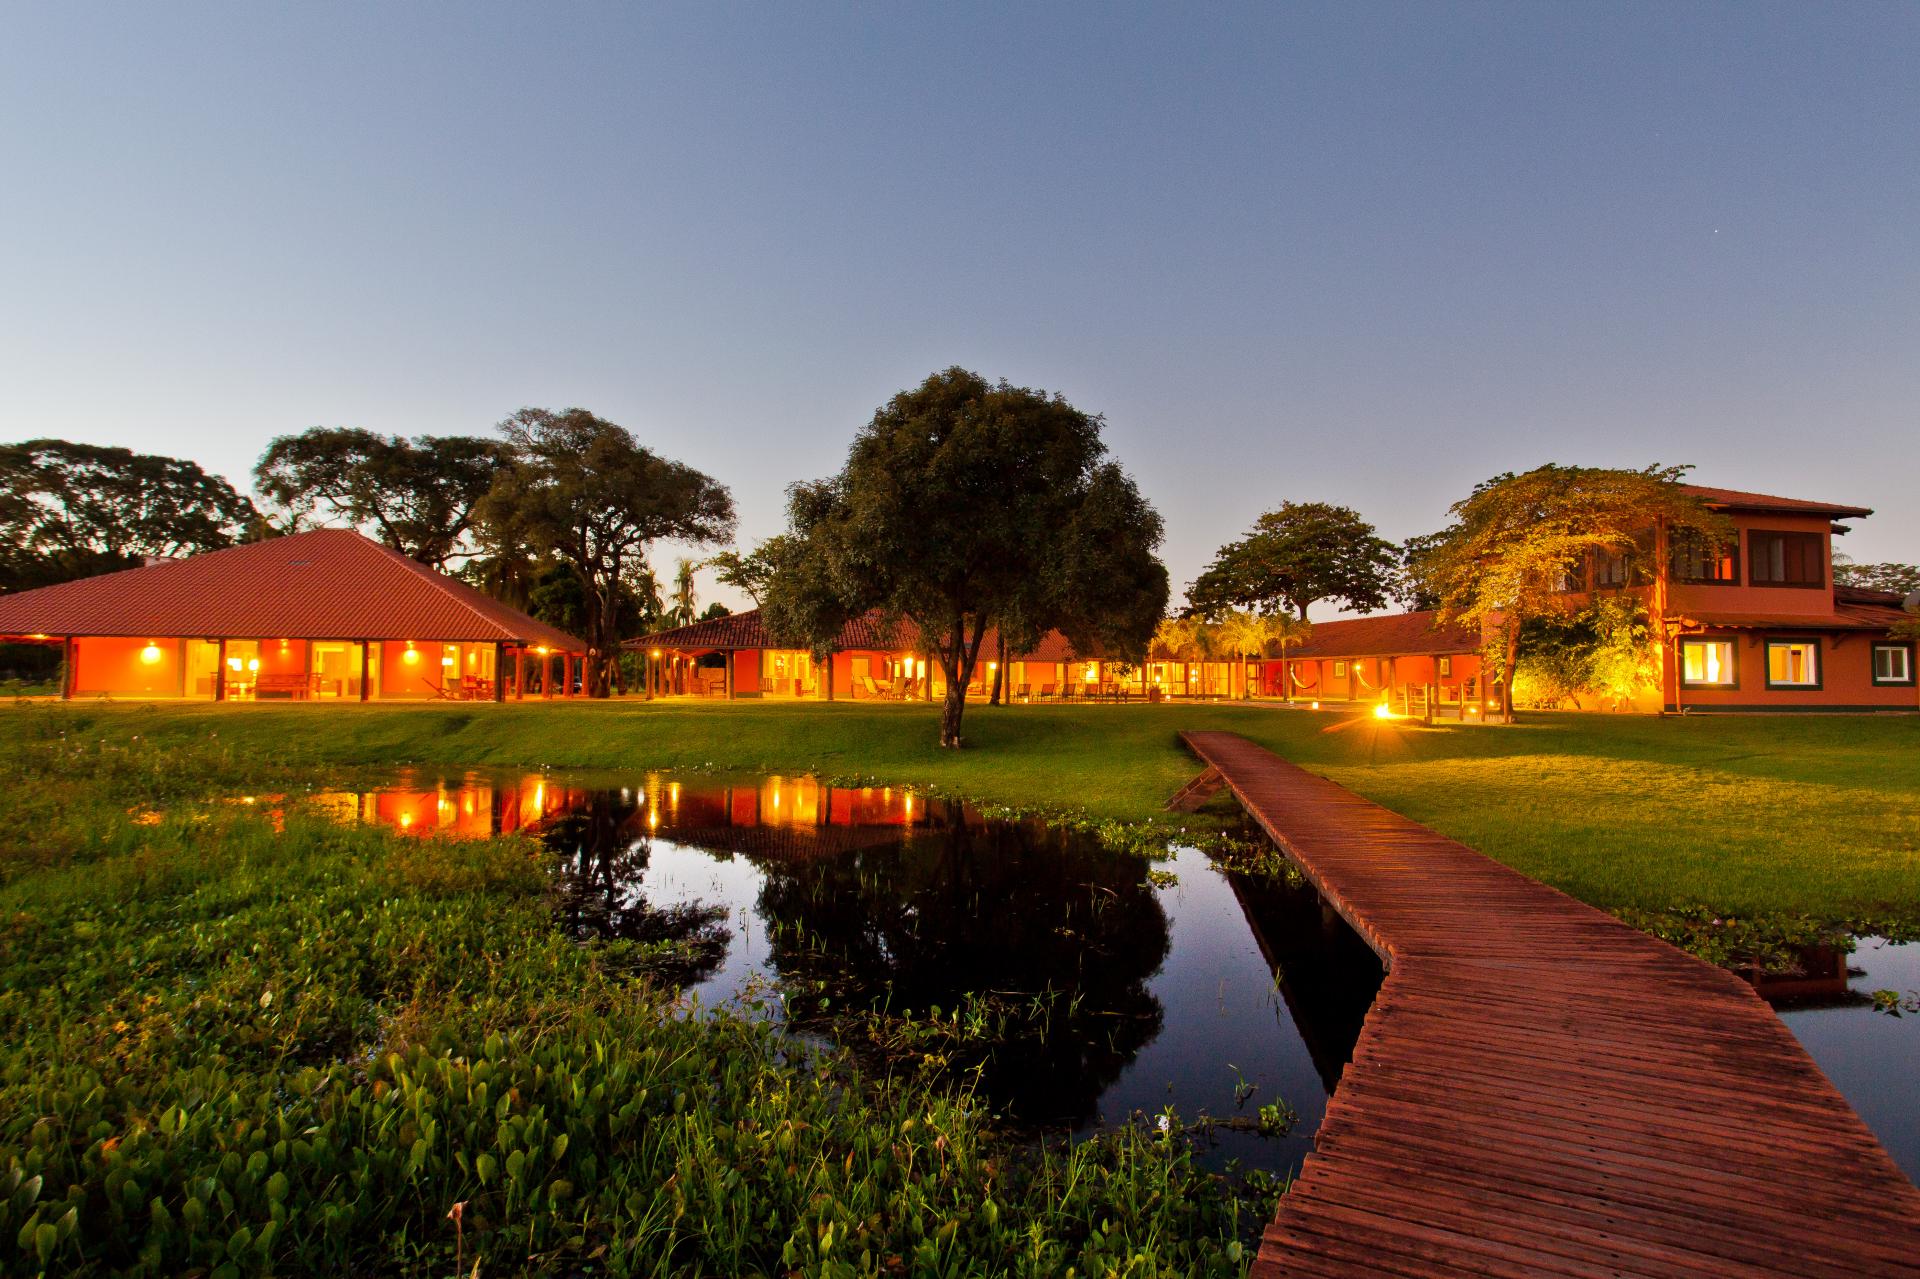 Beautiful lights, reflecting on the water, in the afternoon at Caiman Lodge in the southern Pantanal